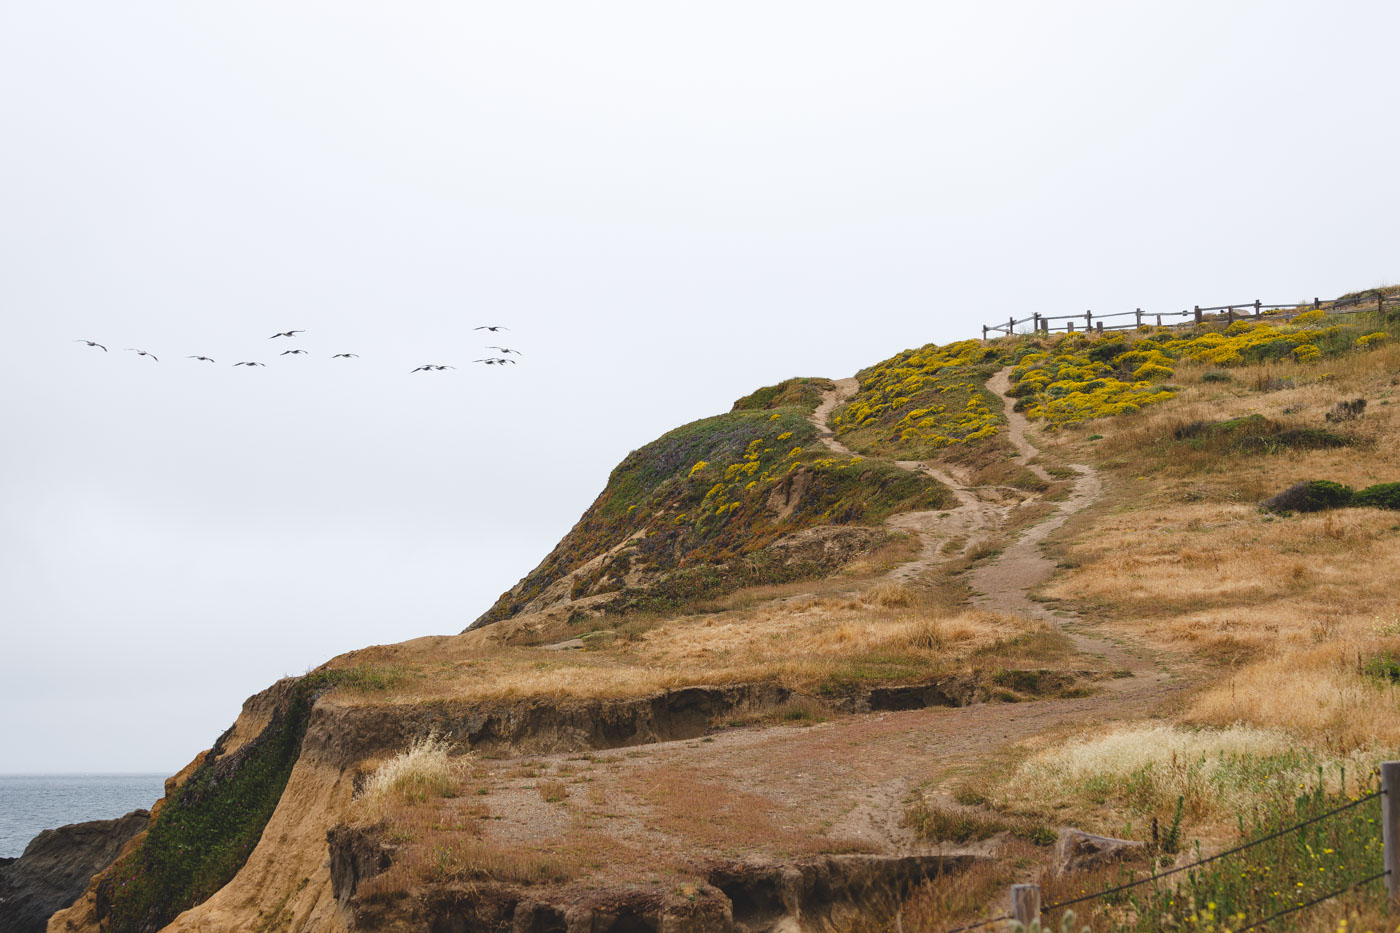 A flock of seagulls flying by cliffs at Rodeo Beach in the Golden Gate National Recreational Area.